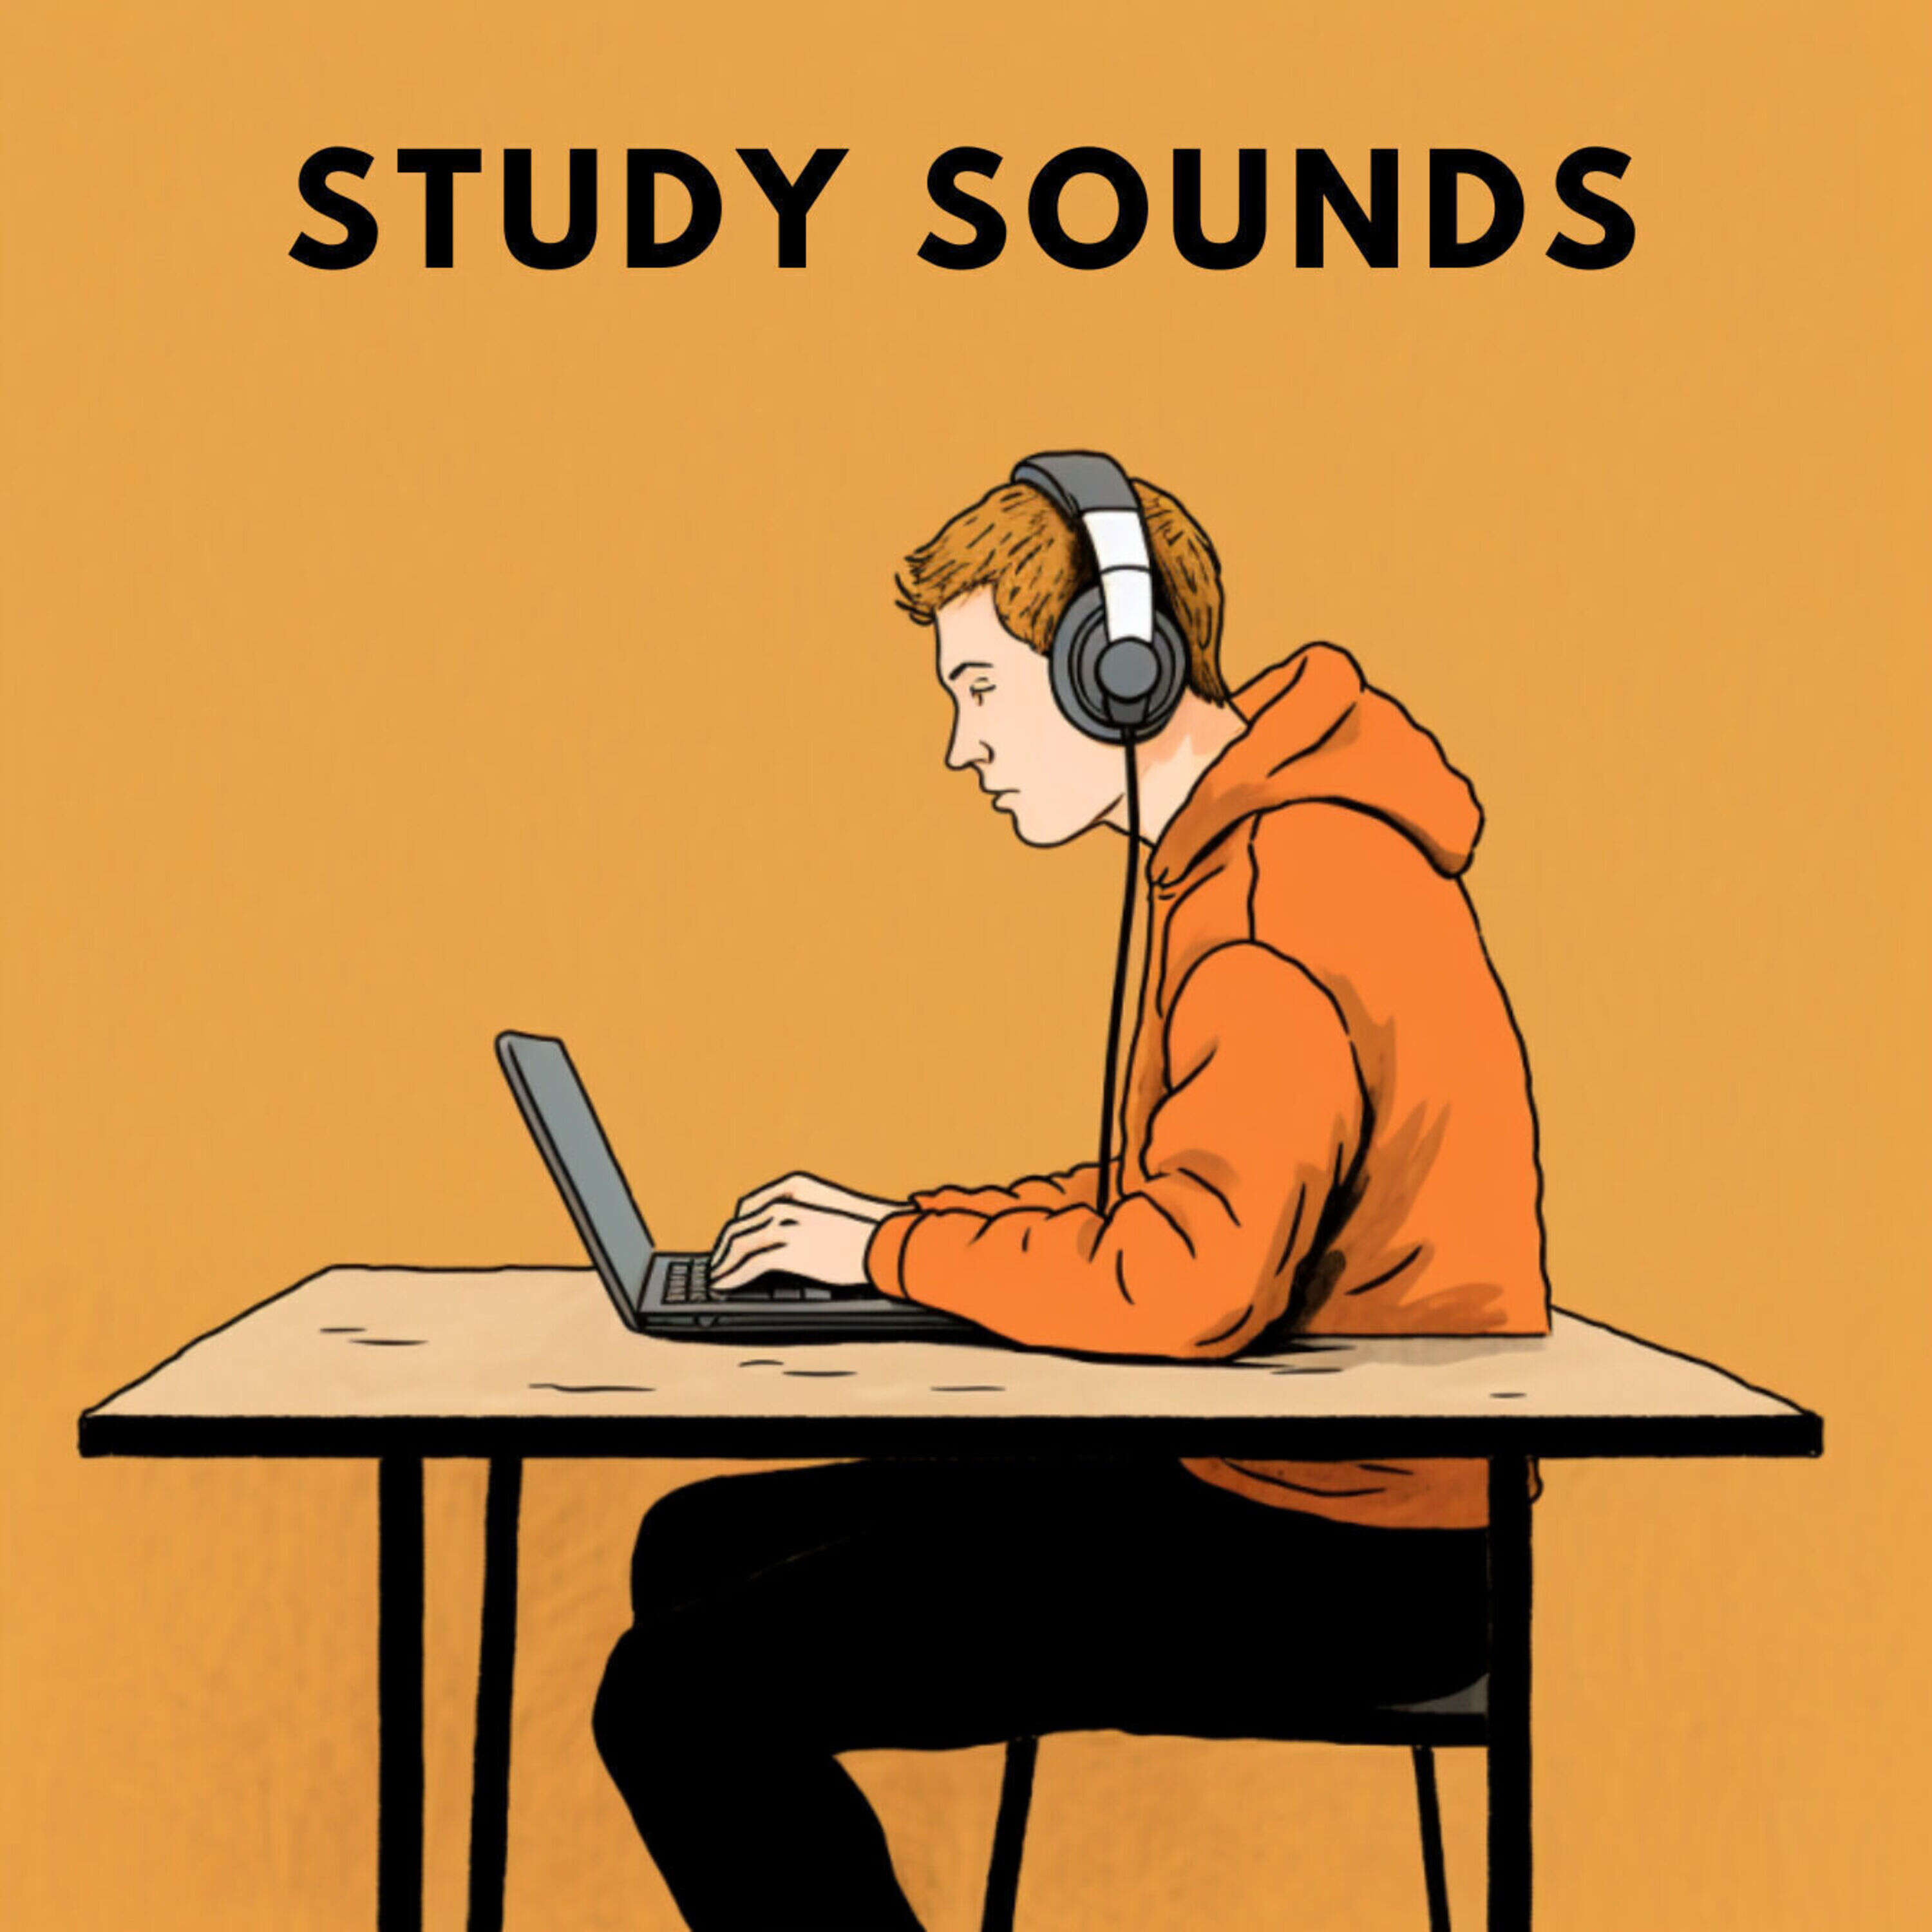 Study sounds Project - (sounds for Studying)